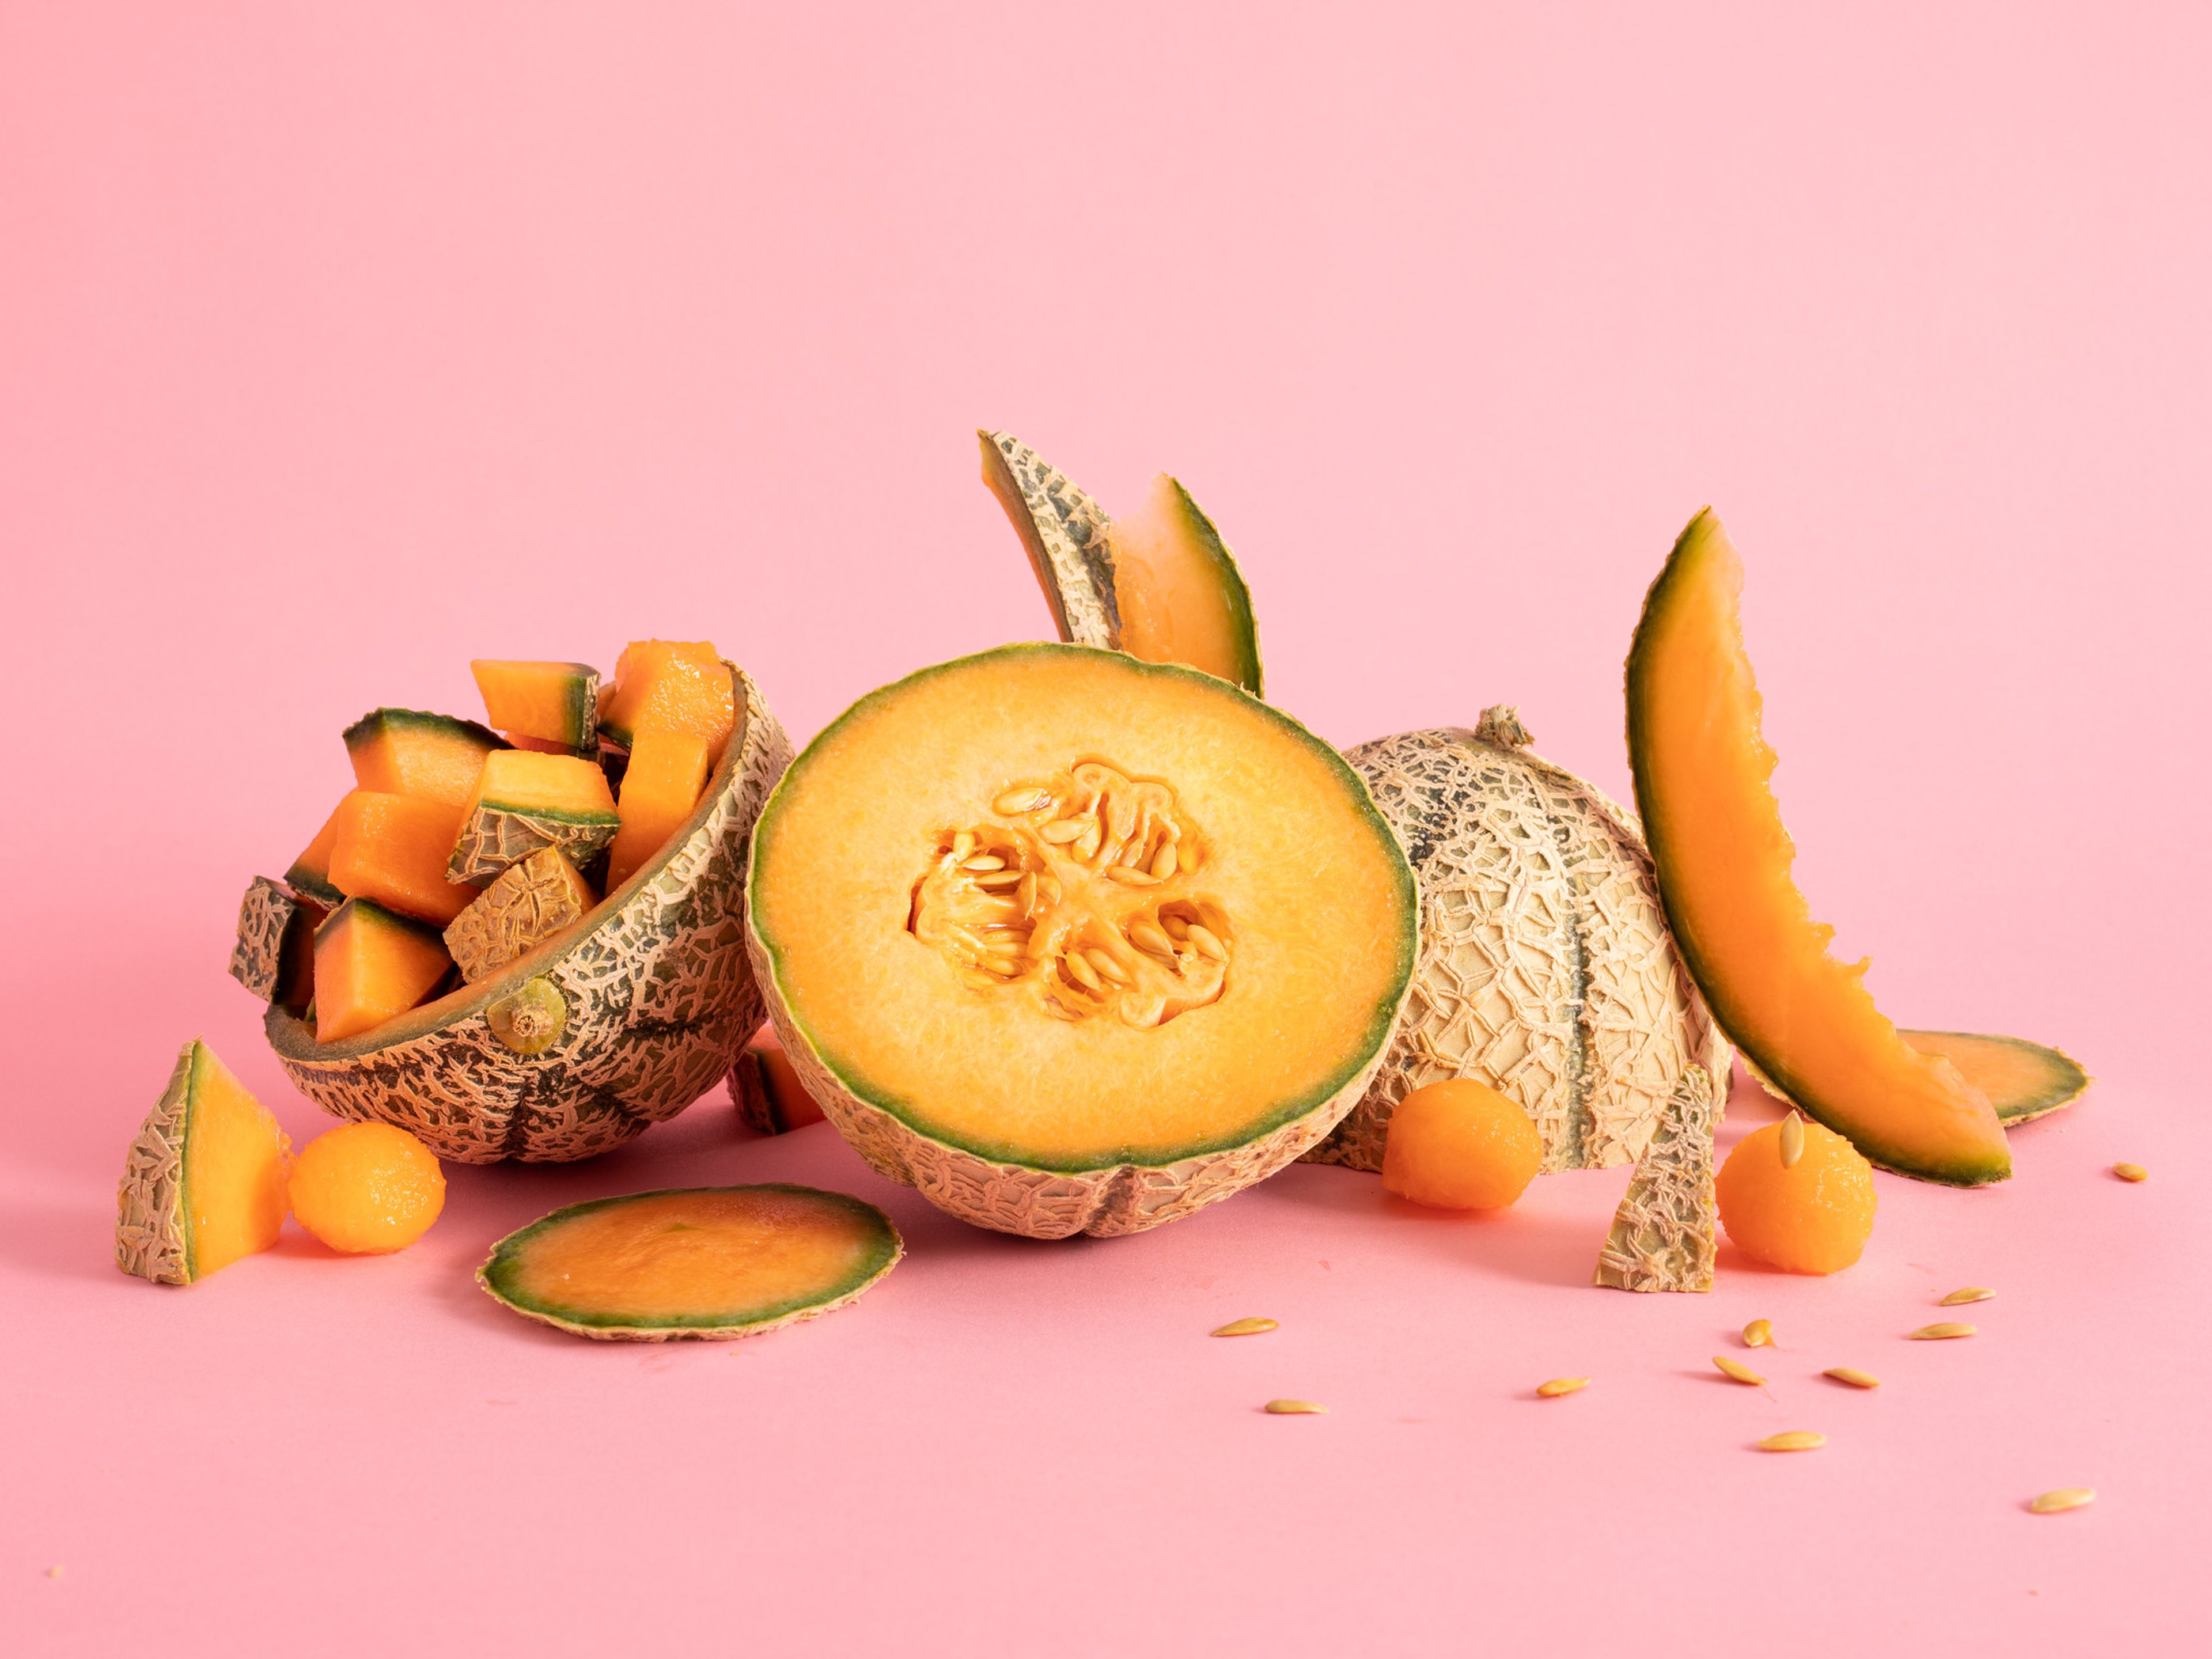 Everything You Need to Know About Preparing and Storing In Season Cantaloupe